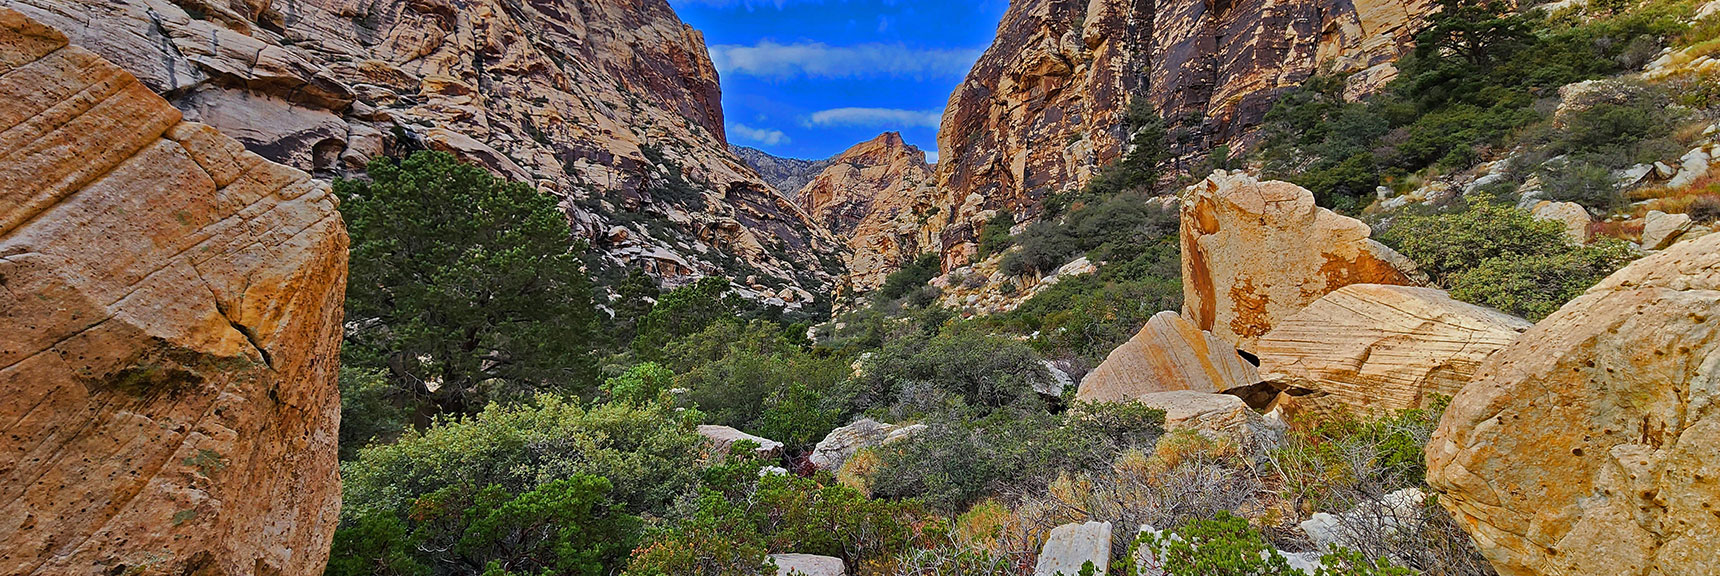 Brush and Boulders Throughout the Length of Oak Creek Canyon | Oak Creek Canyon North Branch Toward Rainbow Mountains Upper Crest Ridgeline | Rainbow Mountain Wilderness, Nevada